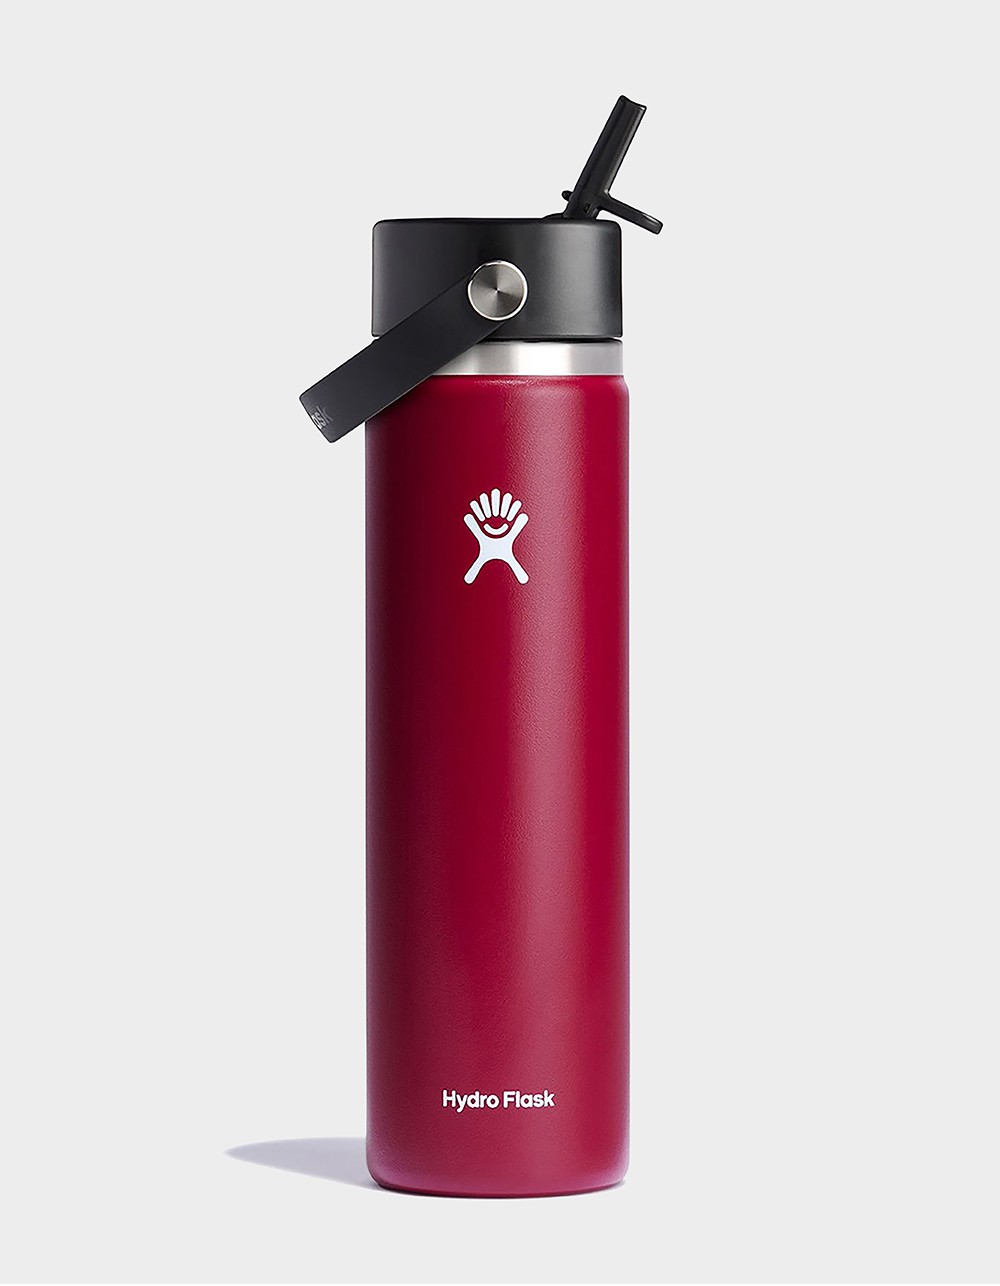 HYDRO FLASK 40 oz Wide Mouth Water Bottle - Special Edition - COTTON CANDY, Tillys